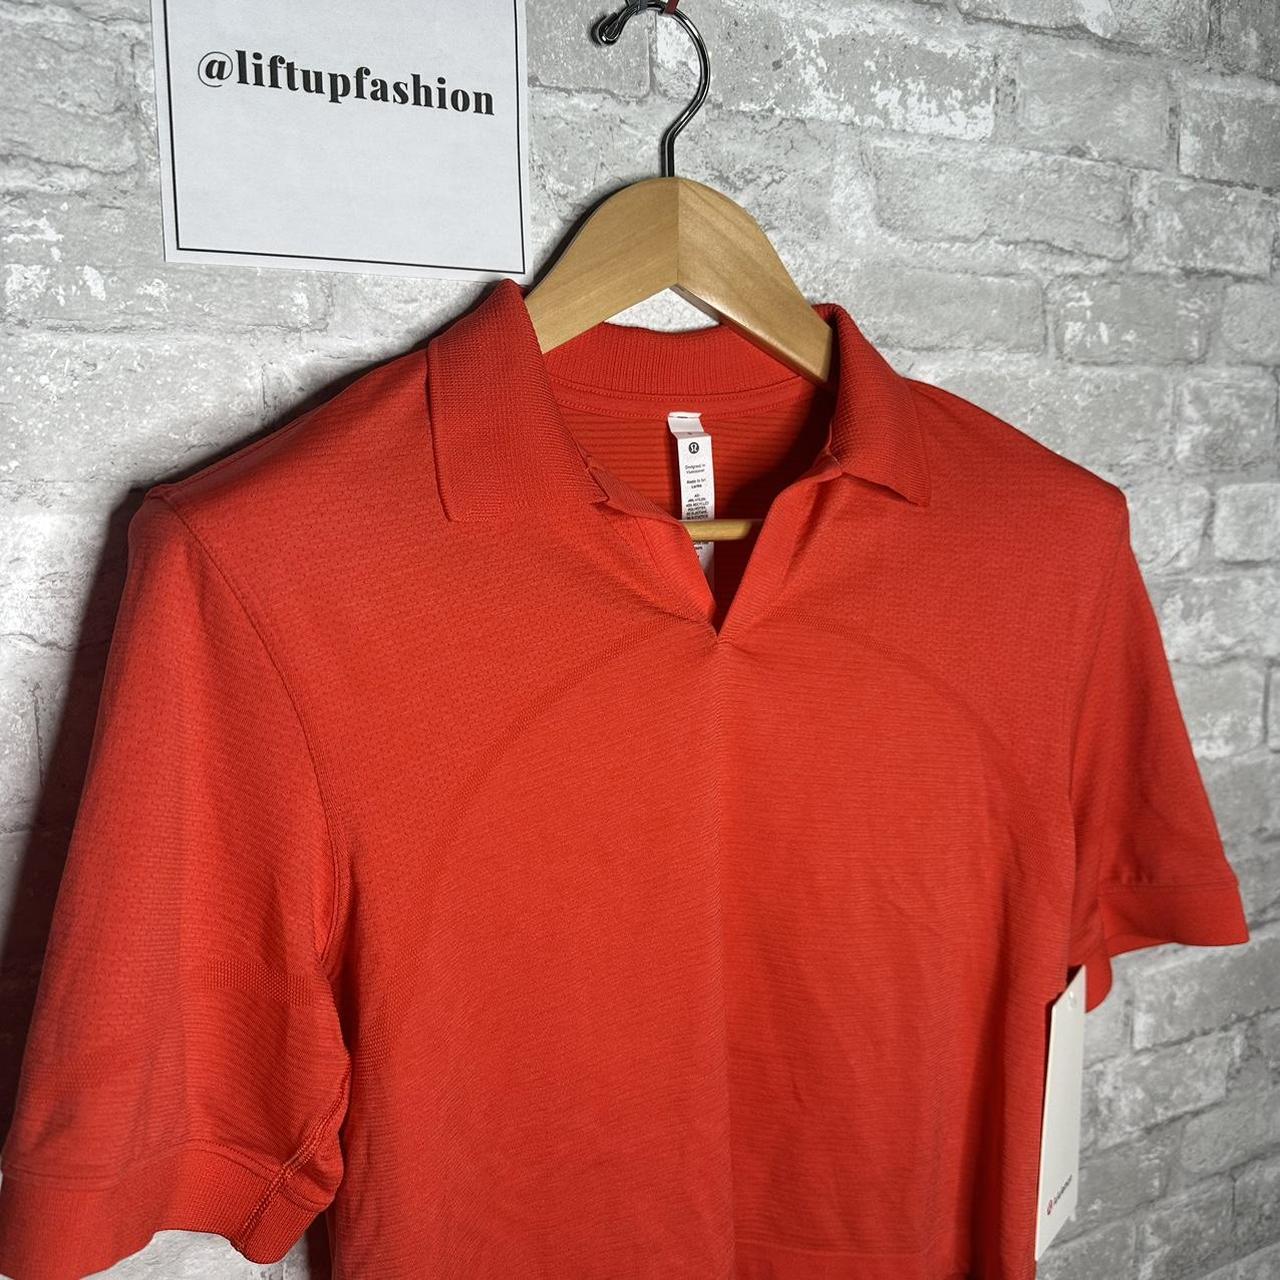 New Lululemon Swiftly Tech Relaxed-Fit Polo Shirt Hot heat red